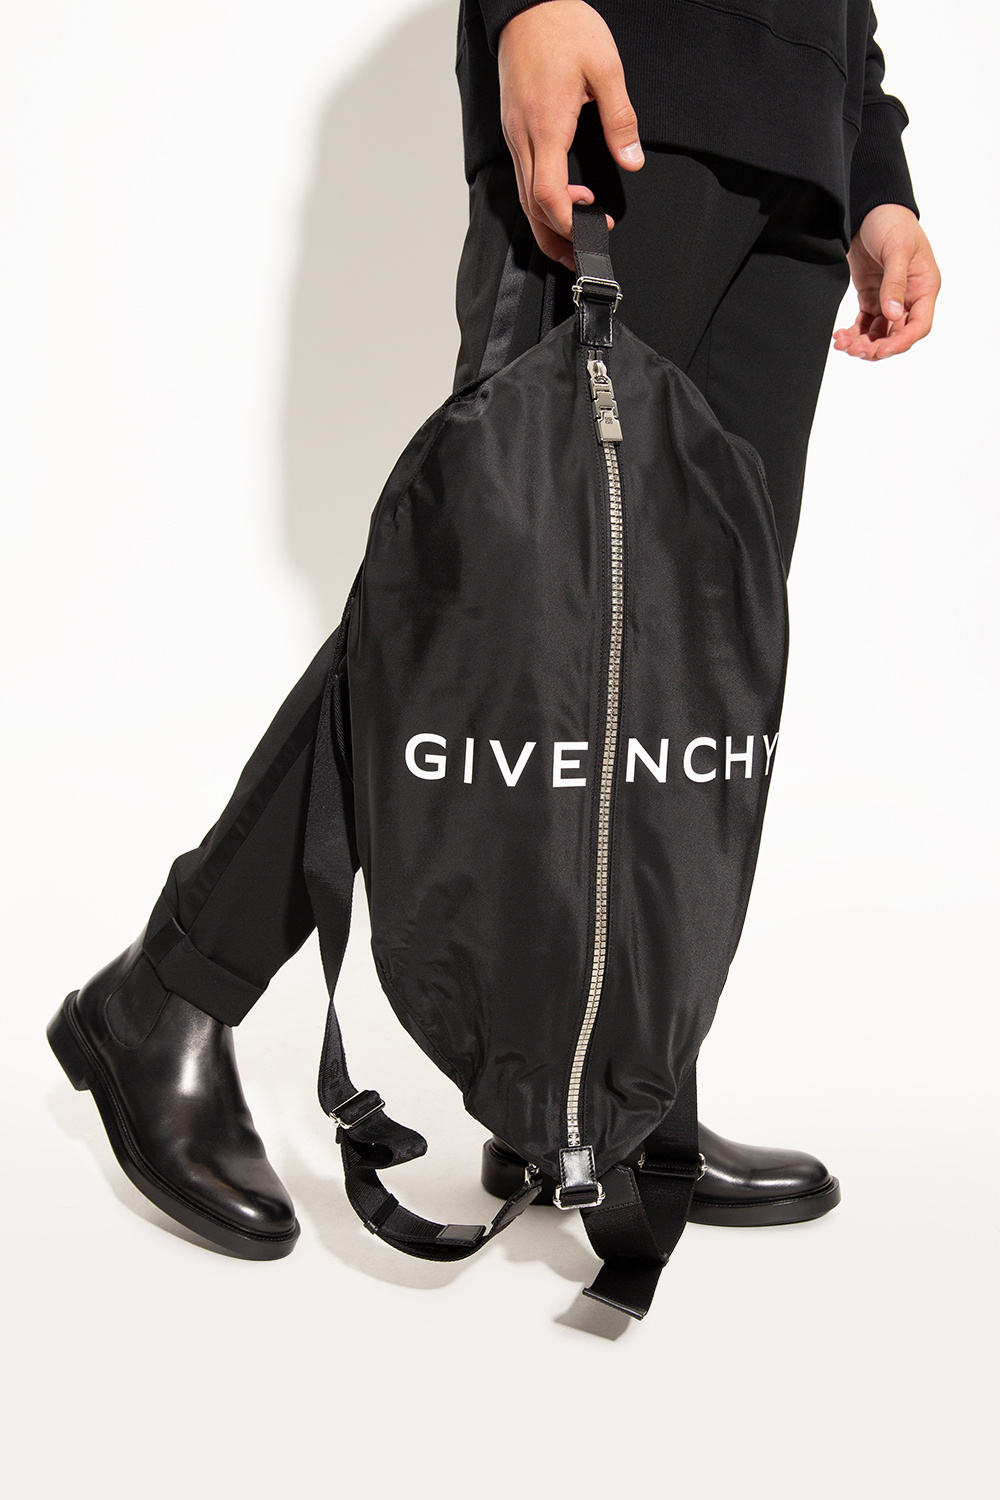 Givenchy ‘G-Zip’ logo-patch